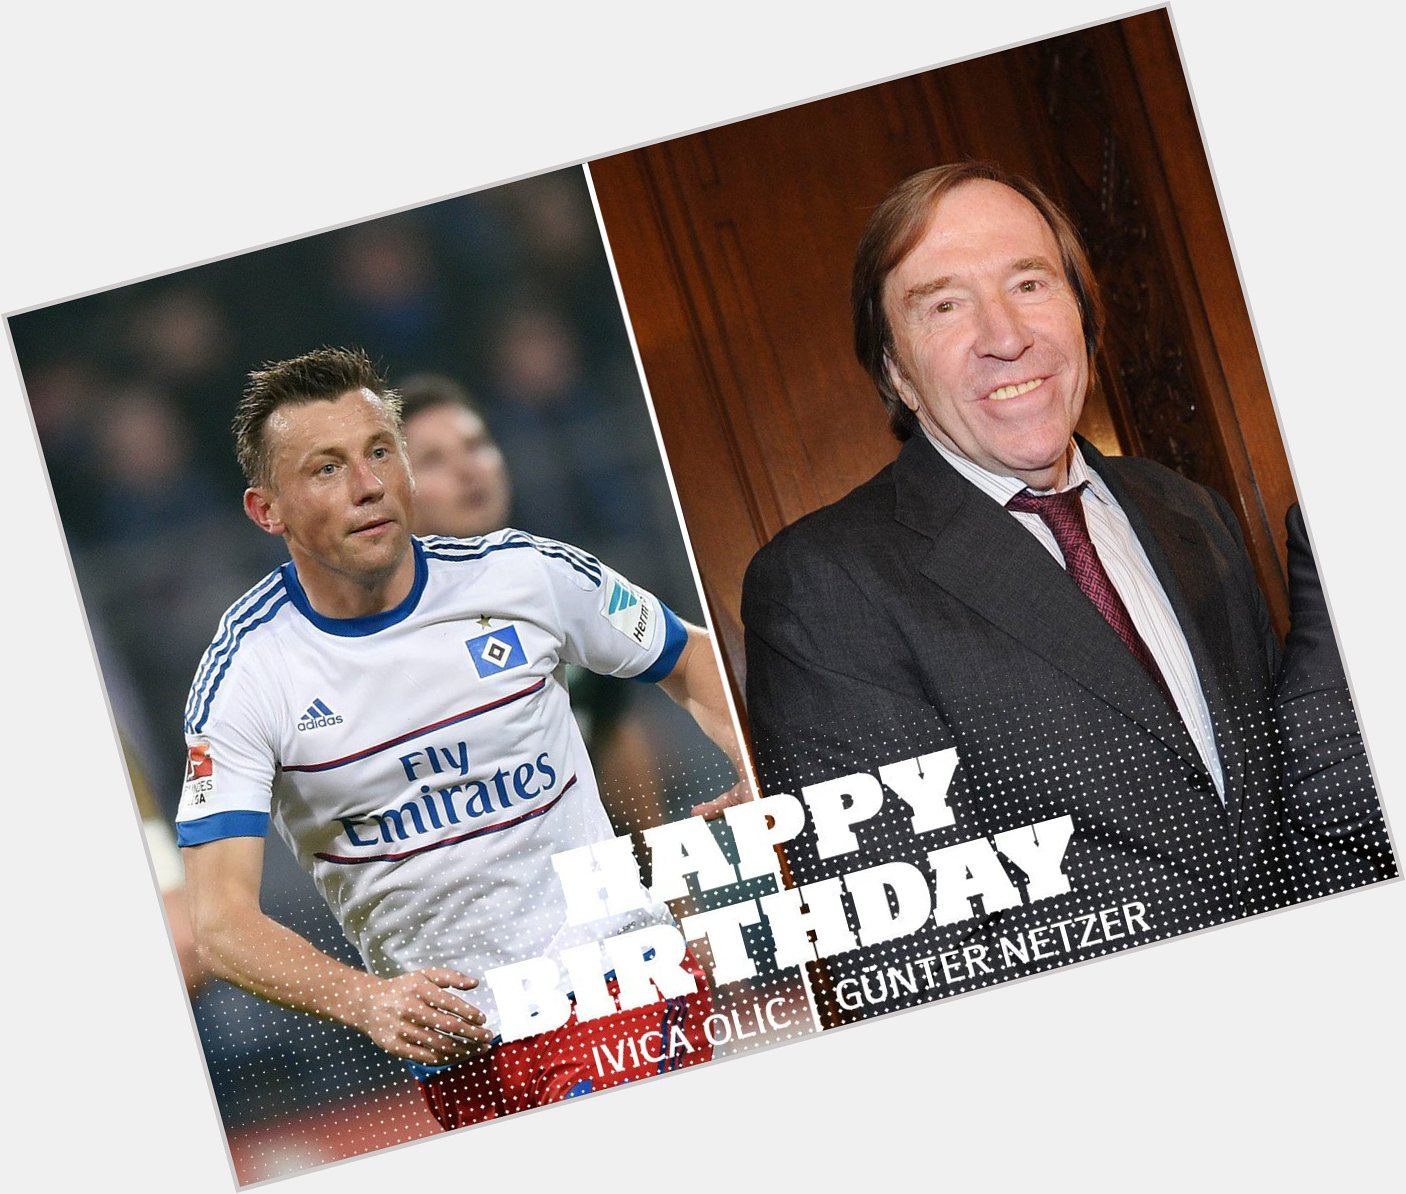 Happy birthday to Gunter Netzer and Ivica Olic! They turn 73 and 38 today! 